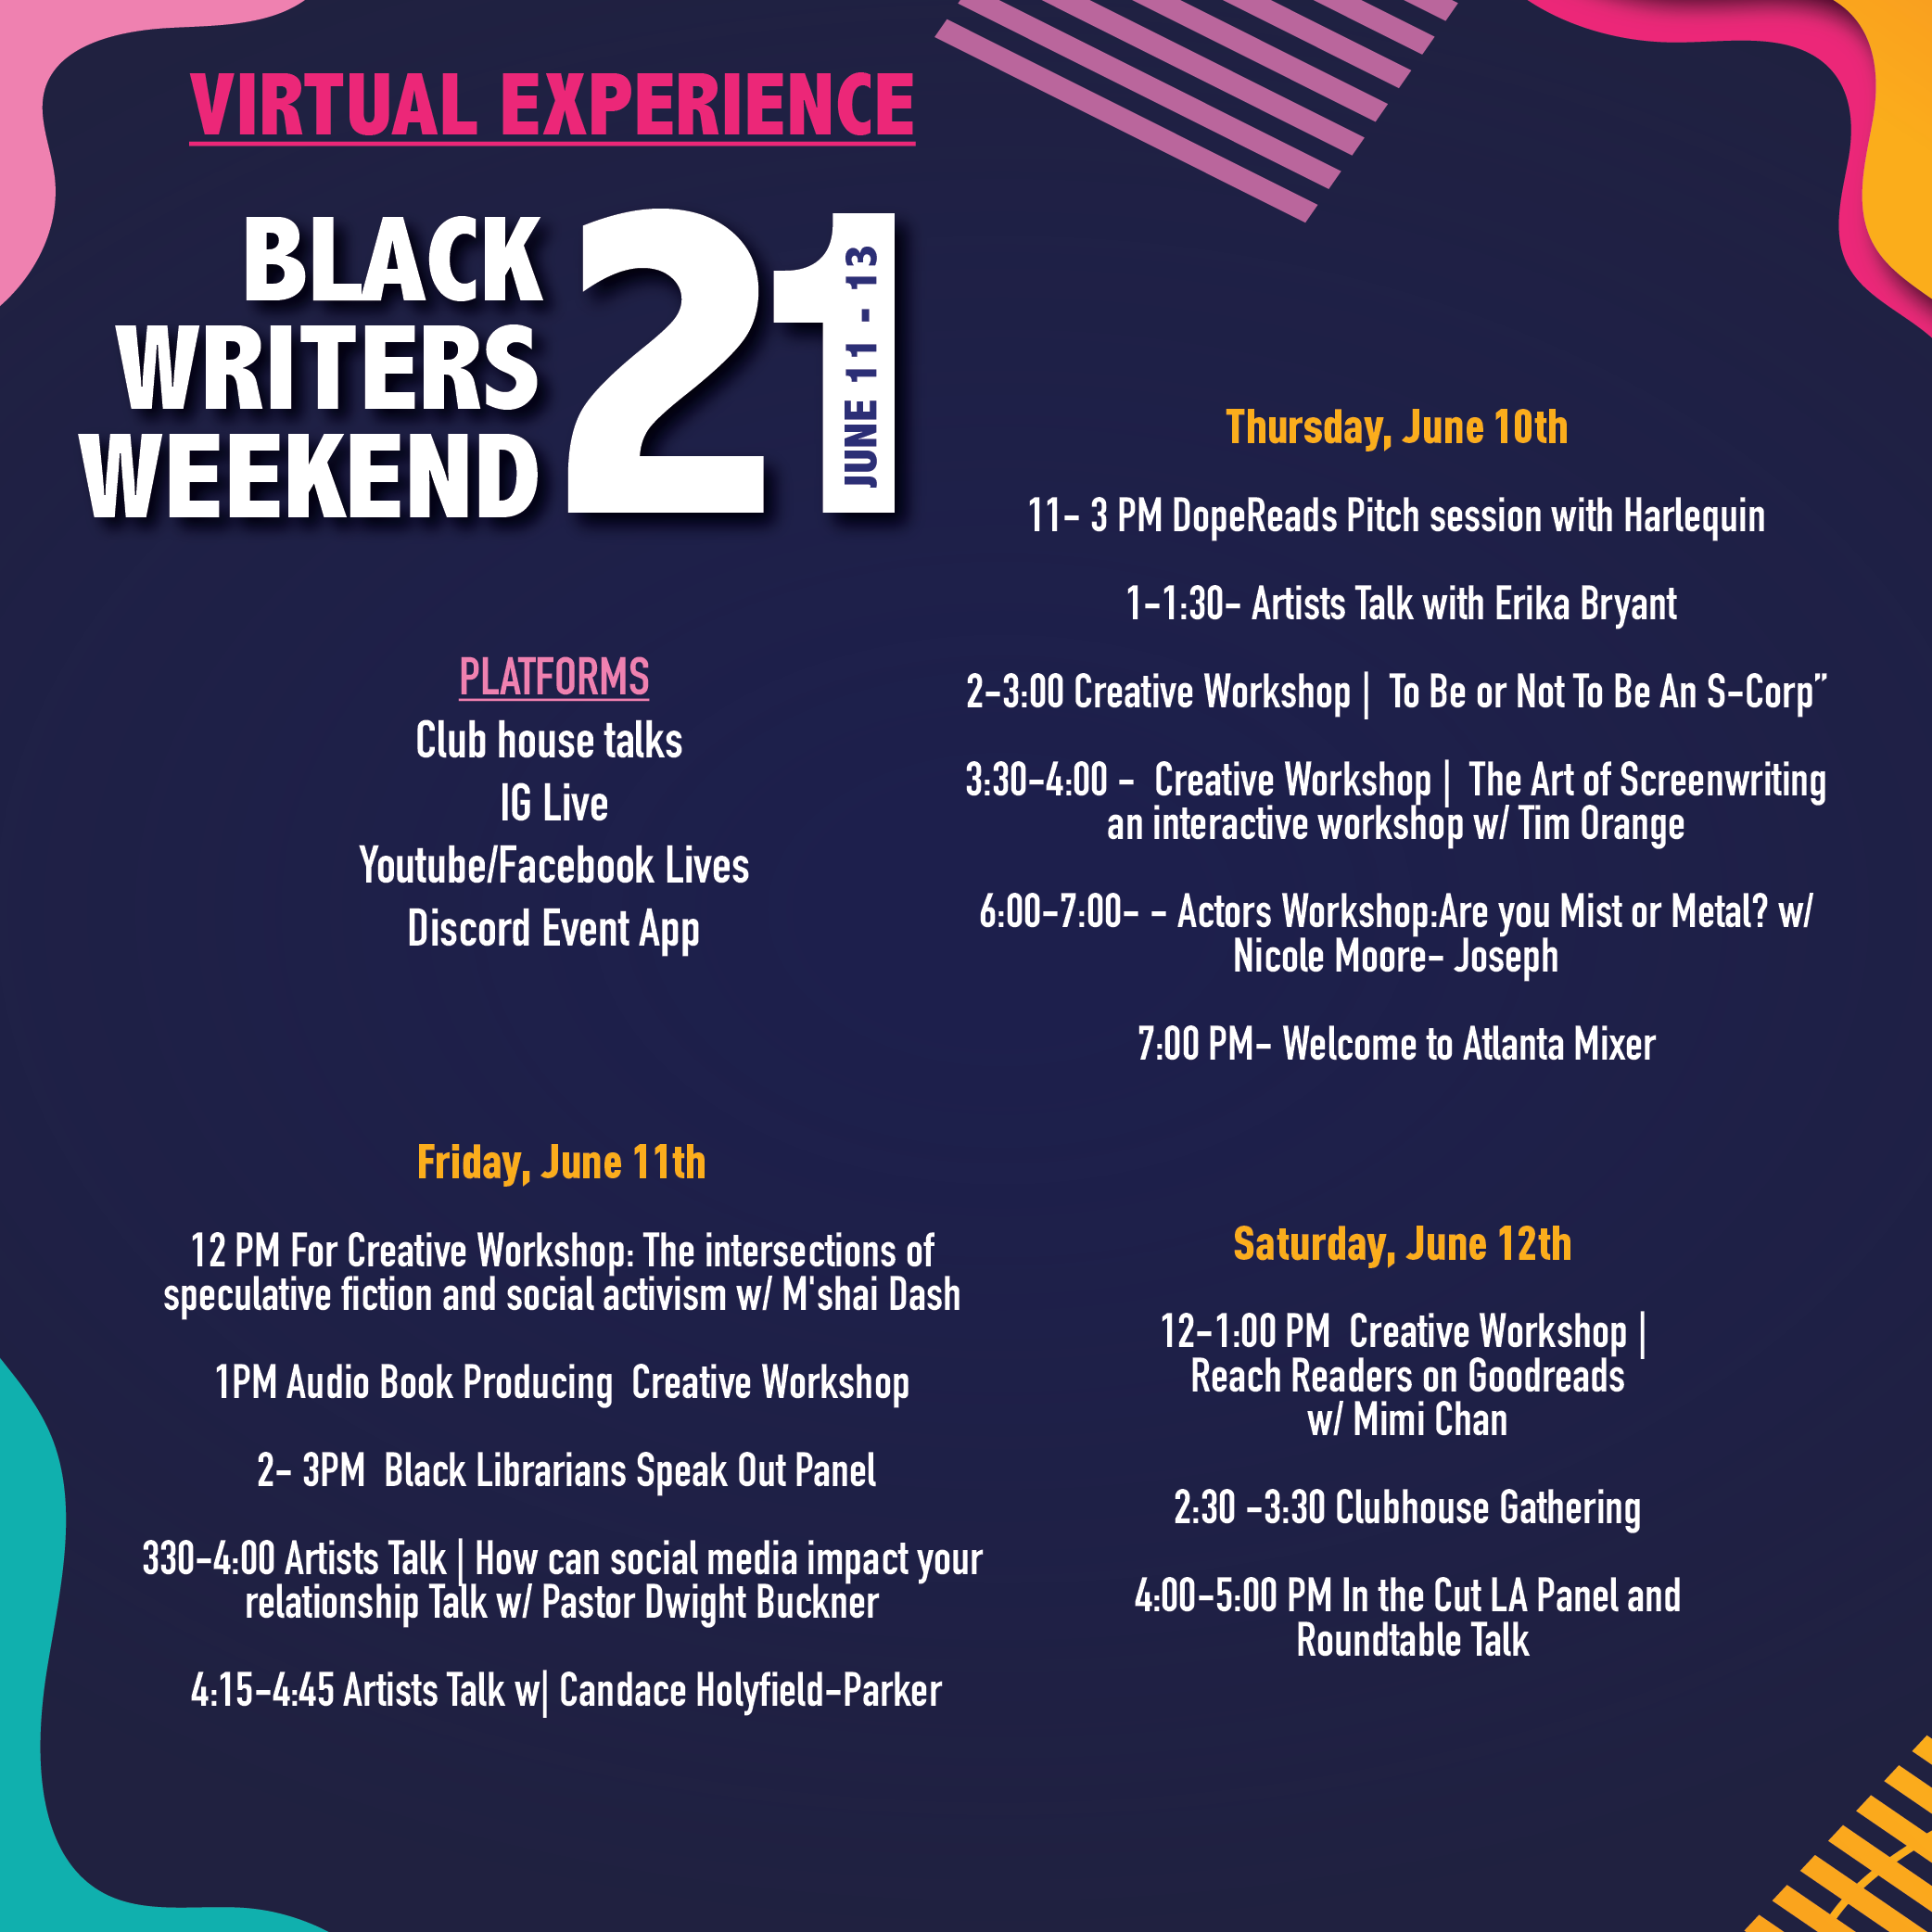 Black Writers Weekend Returns for its 13th year! by Tamika Newhouse